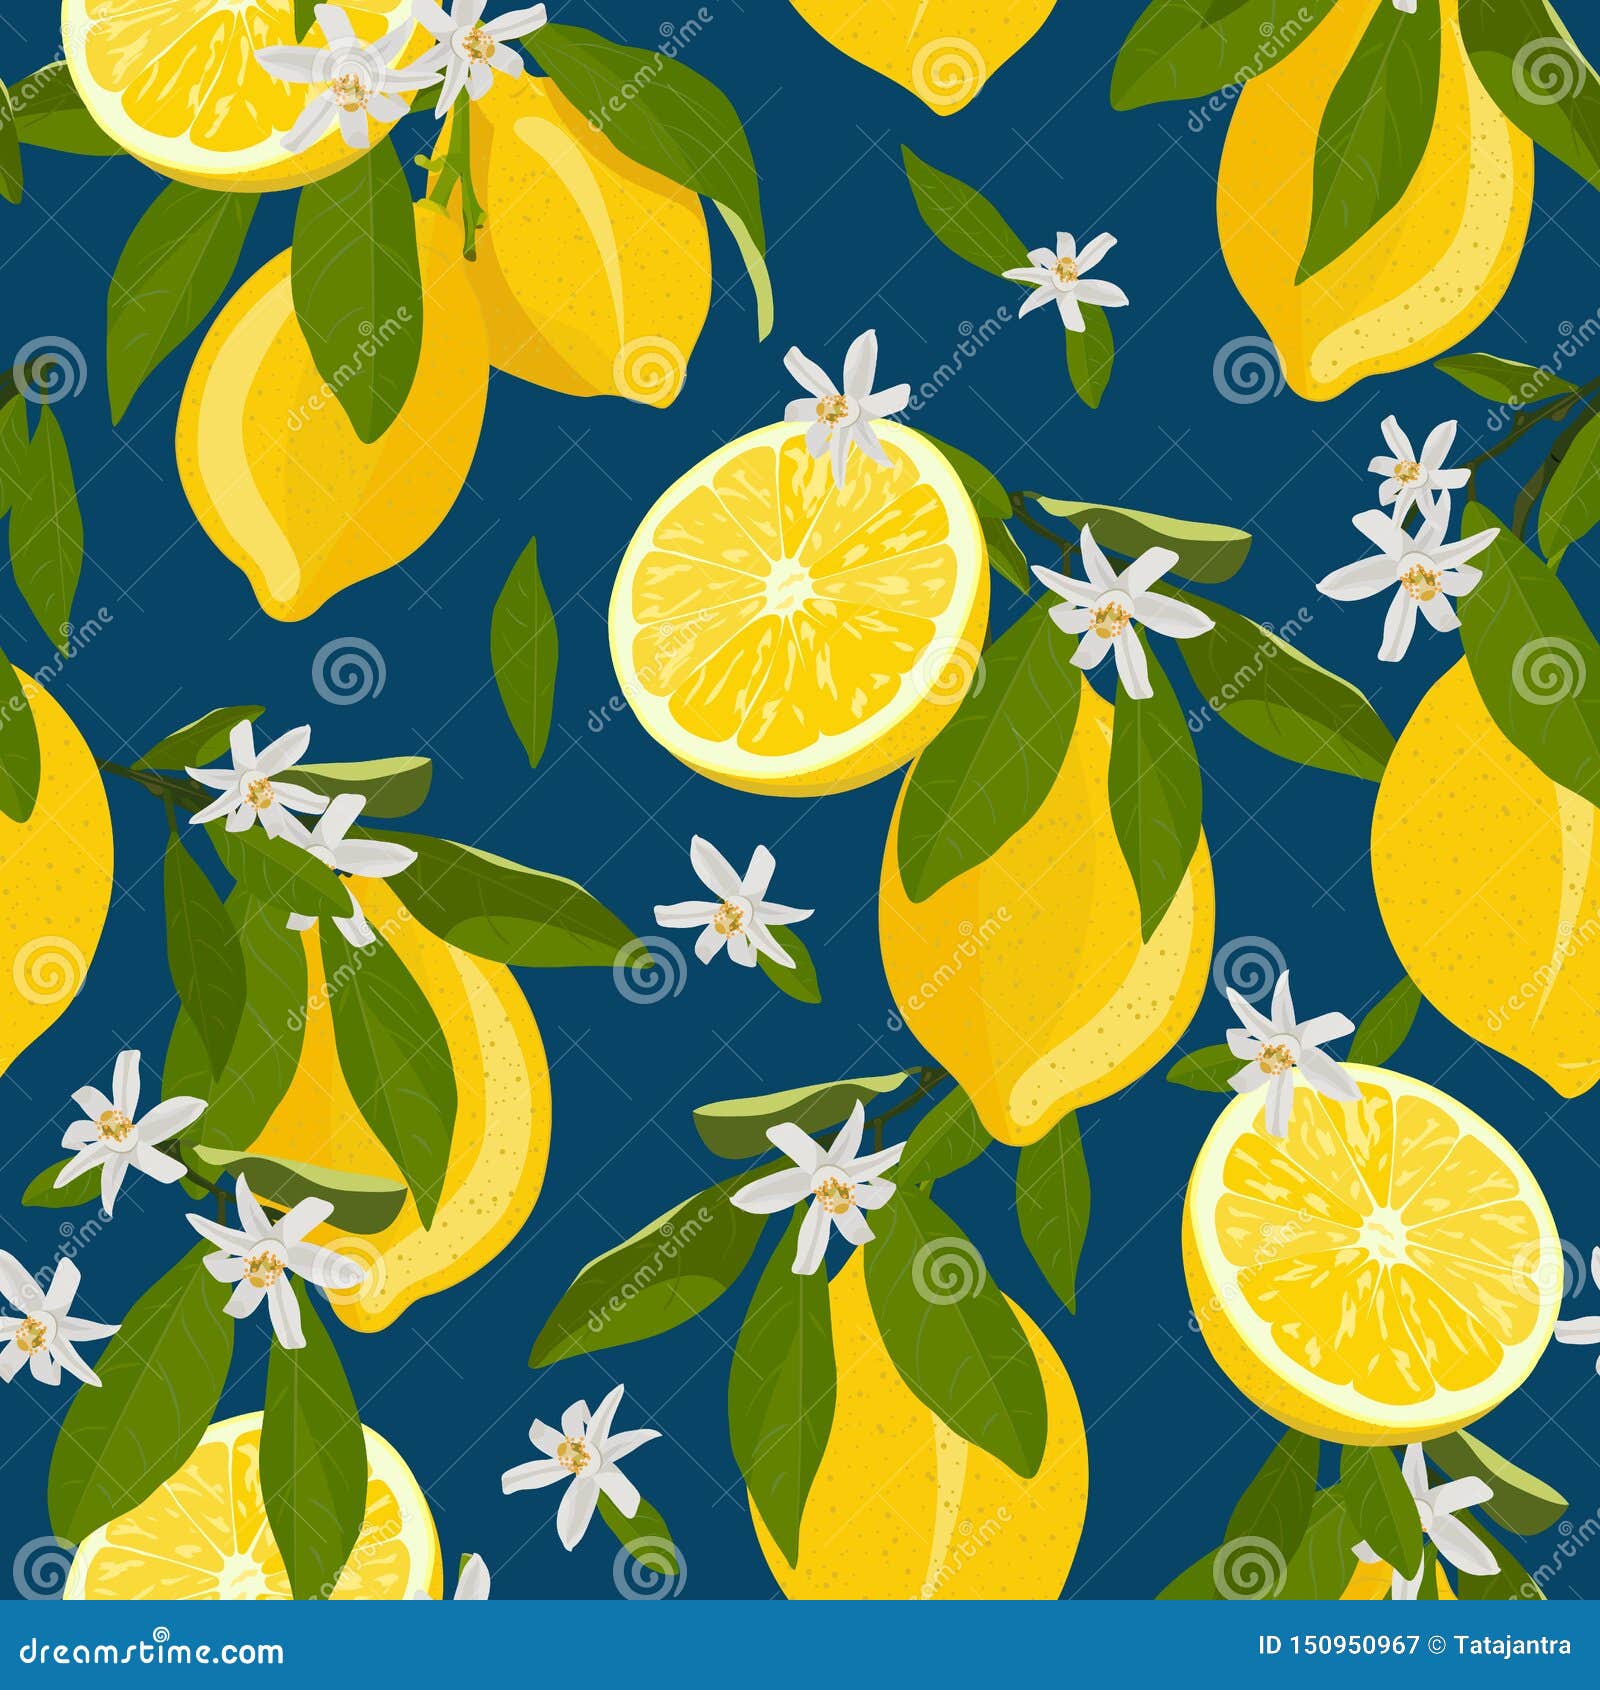 Lemon Fruits Seamless Pattern with Flowers and Leaves Blue Background ...